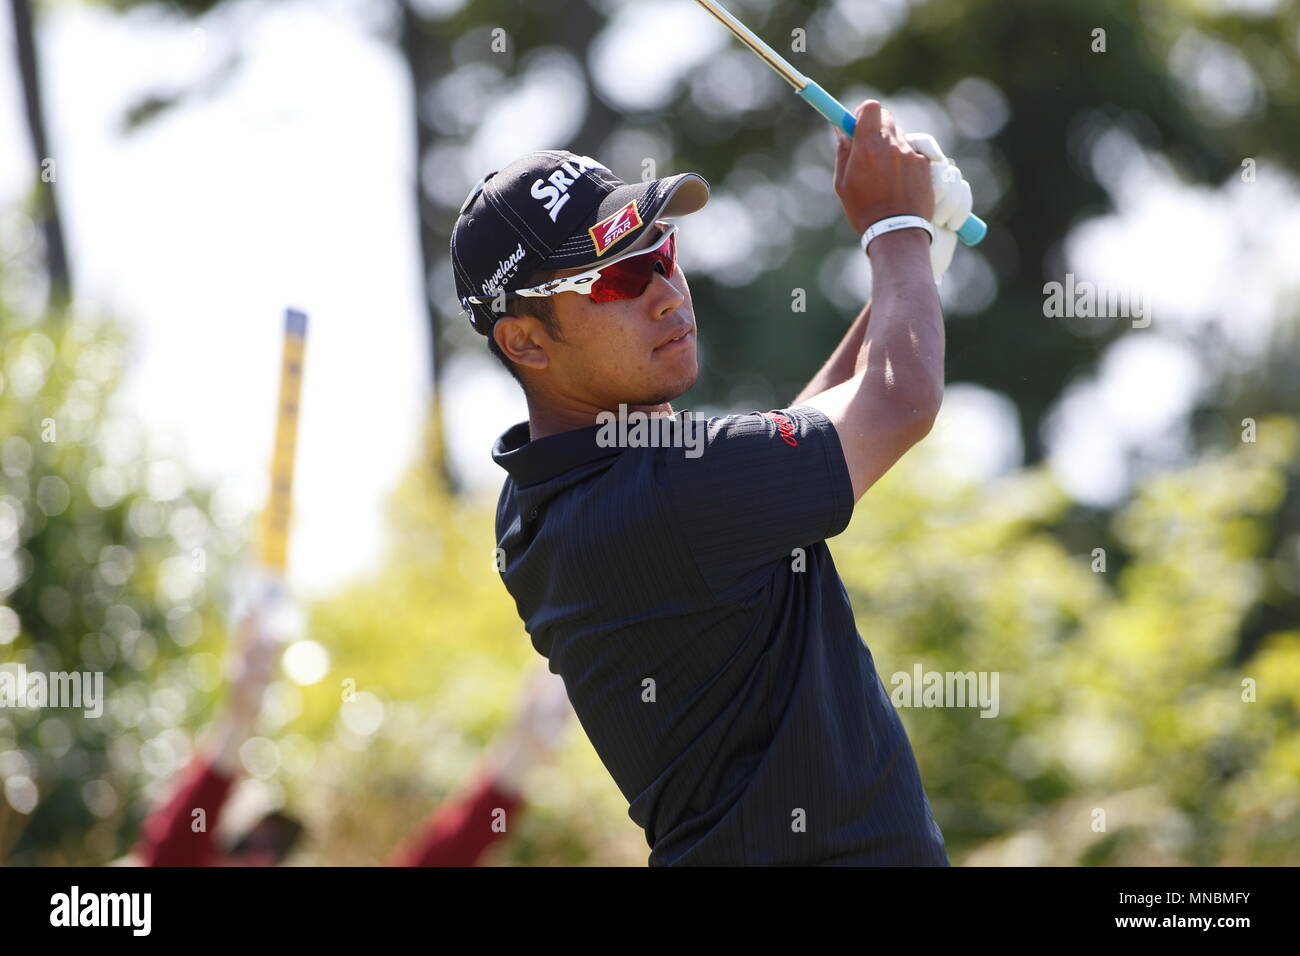 MUIRFIELD, SCOTLAND - JULY 20: Hideki Matsuyama drive from the 2nd tee during the third round of The Open Championship 2013 at Muirfield Golf Club on July 20, 2013 in Scotland. Stock Photo